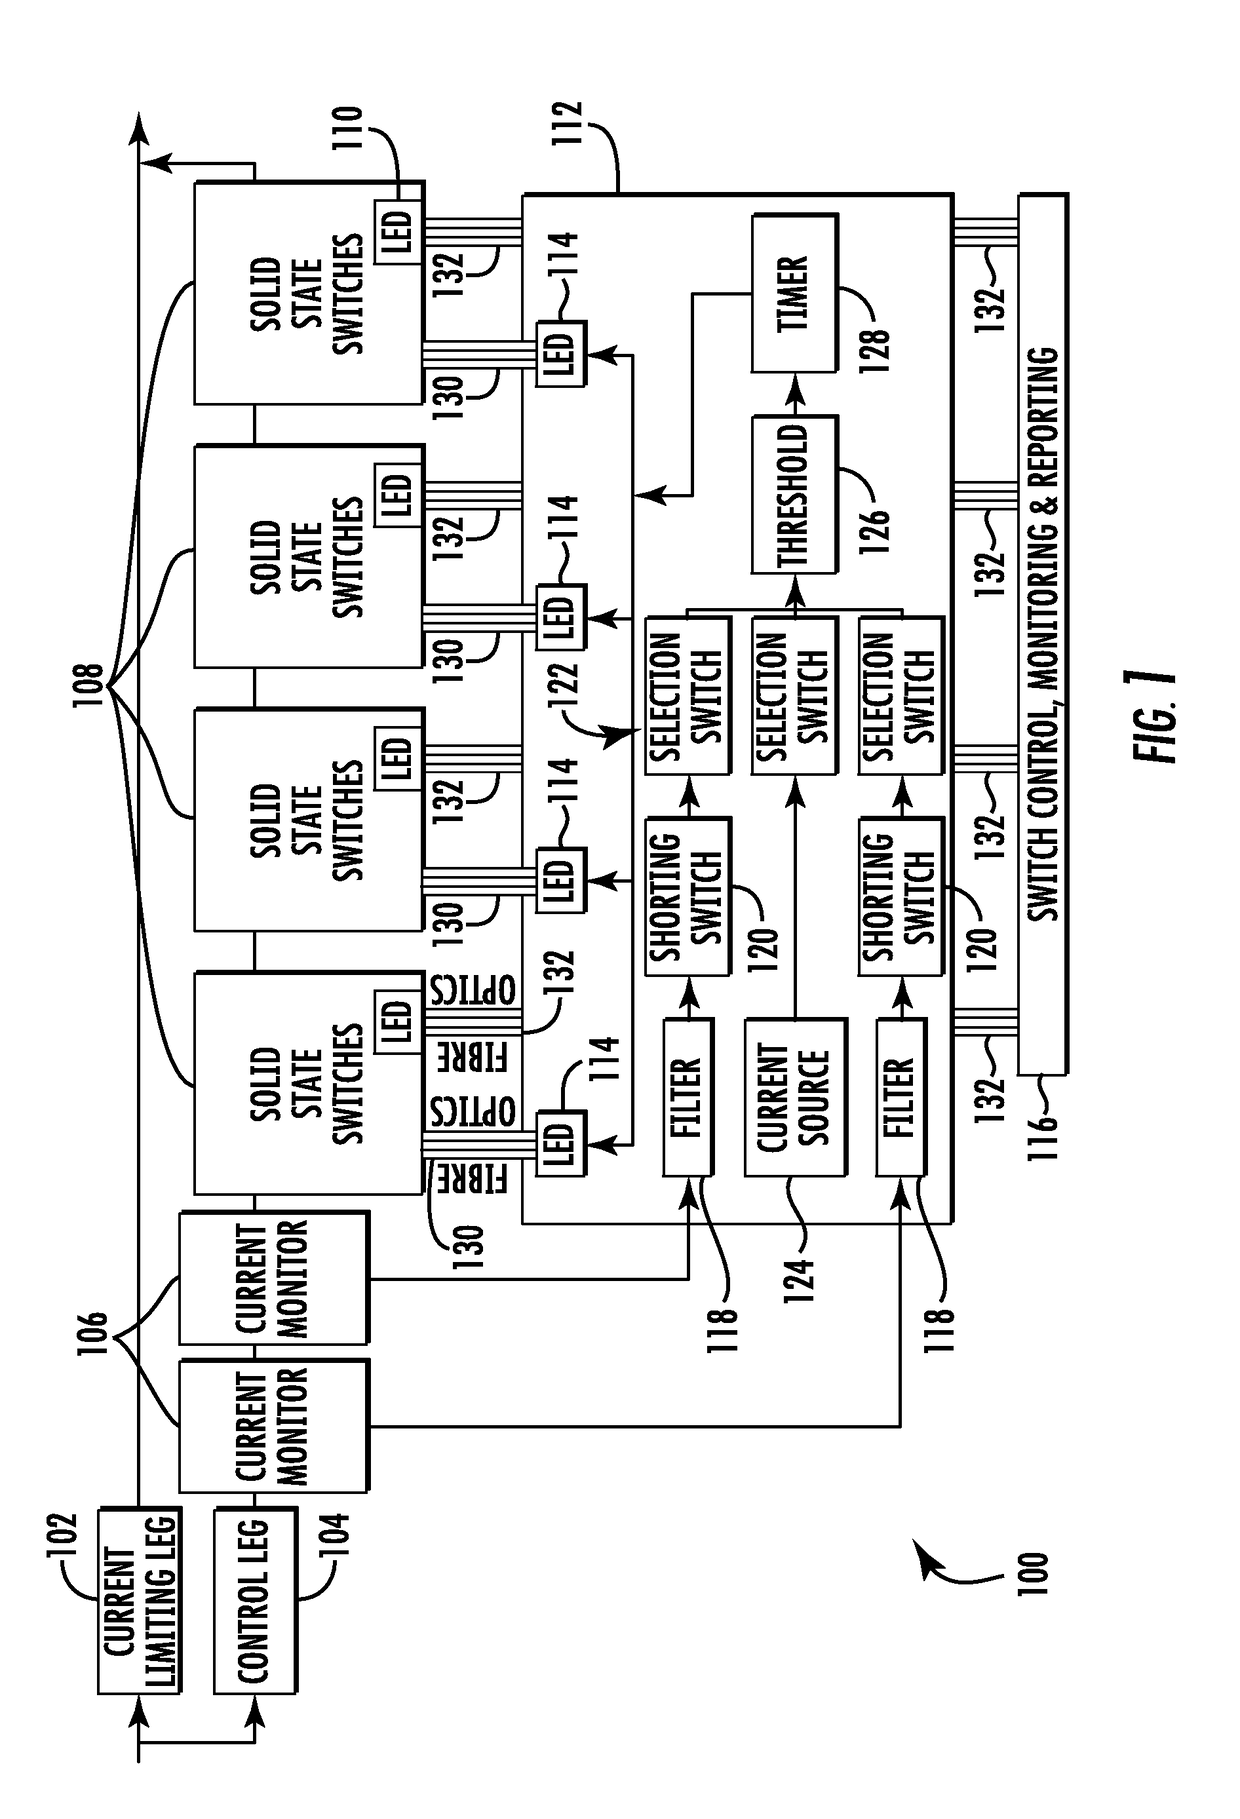 Fault current limiter having self-checking power electronics and triggering circuit